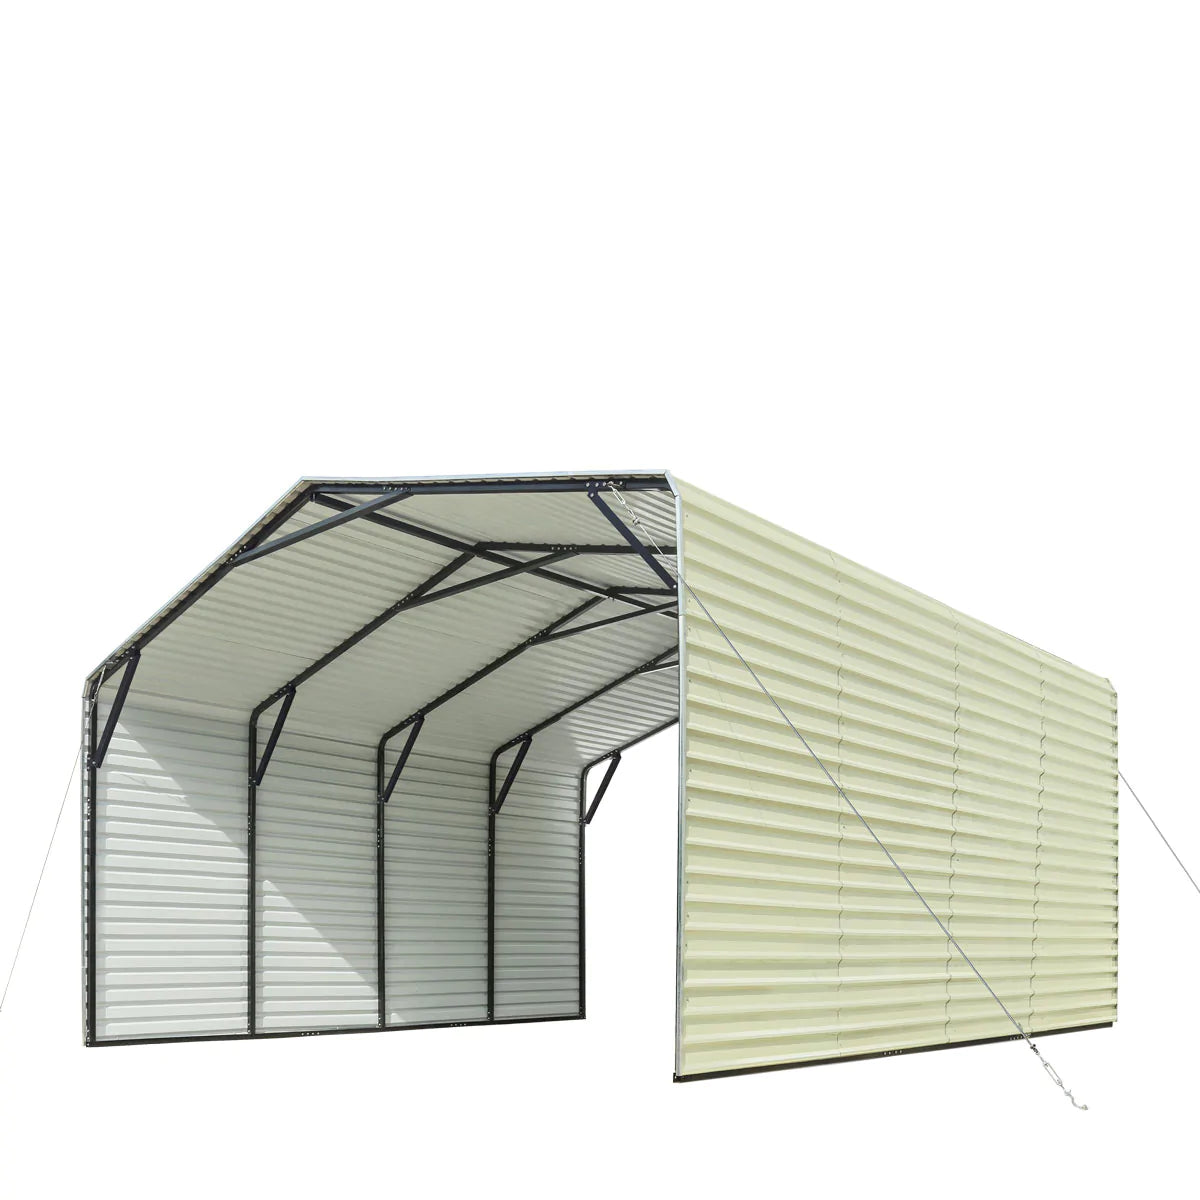 New 20' x 20' All-Steel Carport Shed With 10' High Enclosed Sidewalls